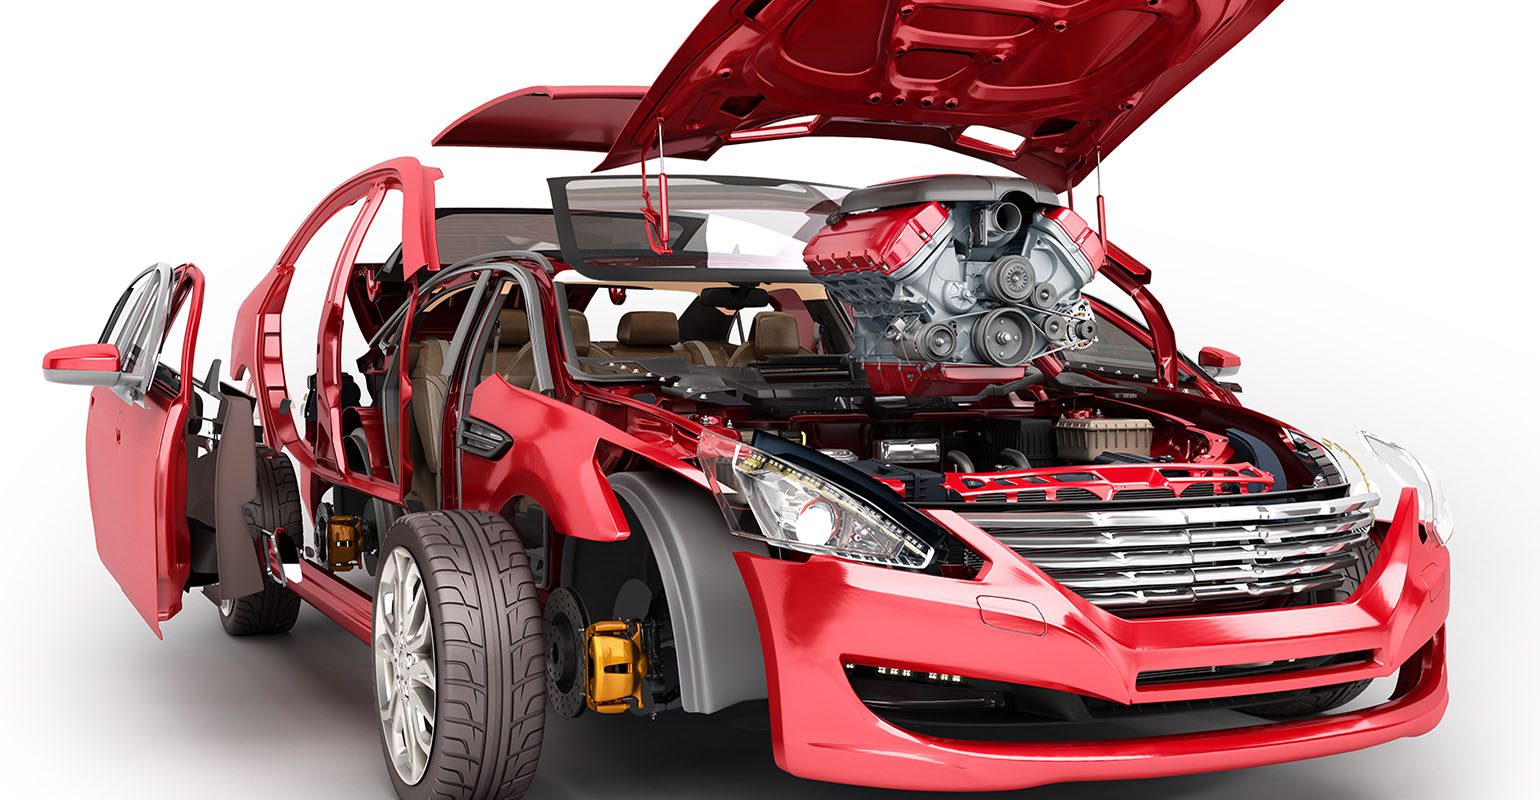 The Future of Automotive Aftermarket Parts